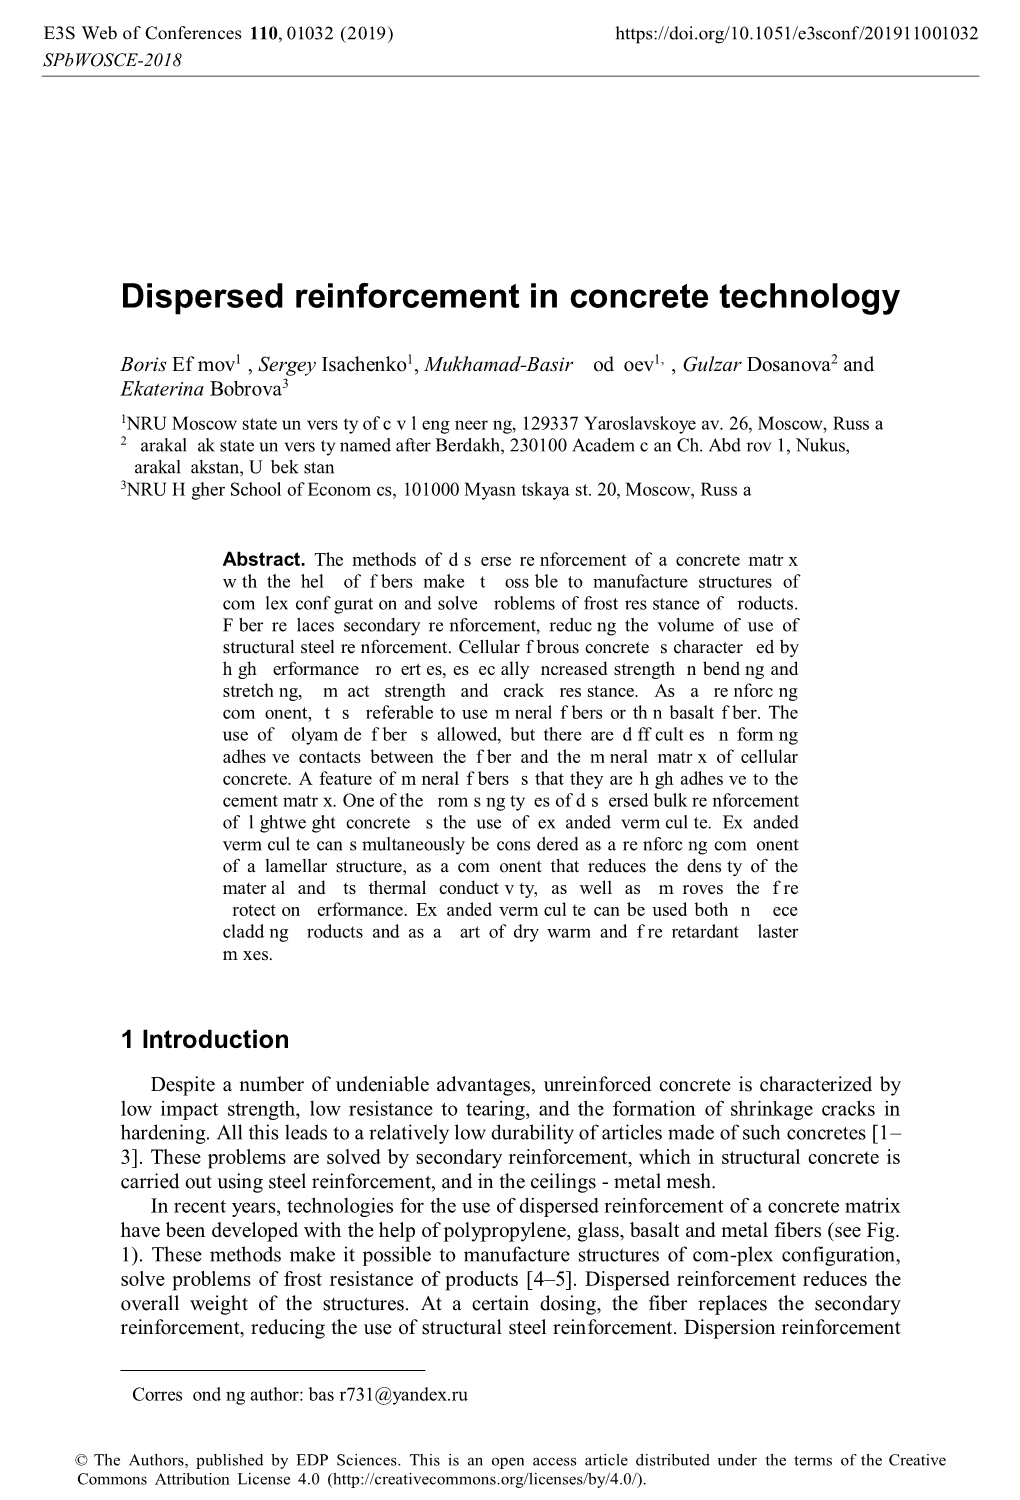 Dispersed Reinforcement in Concrete Technology